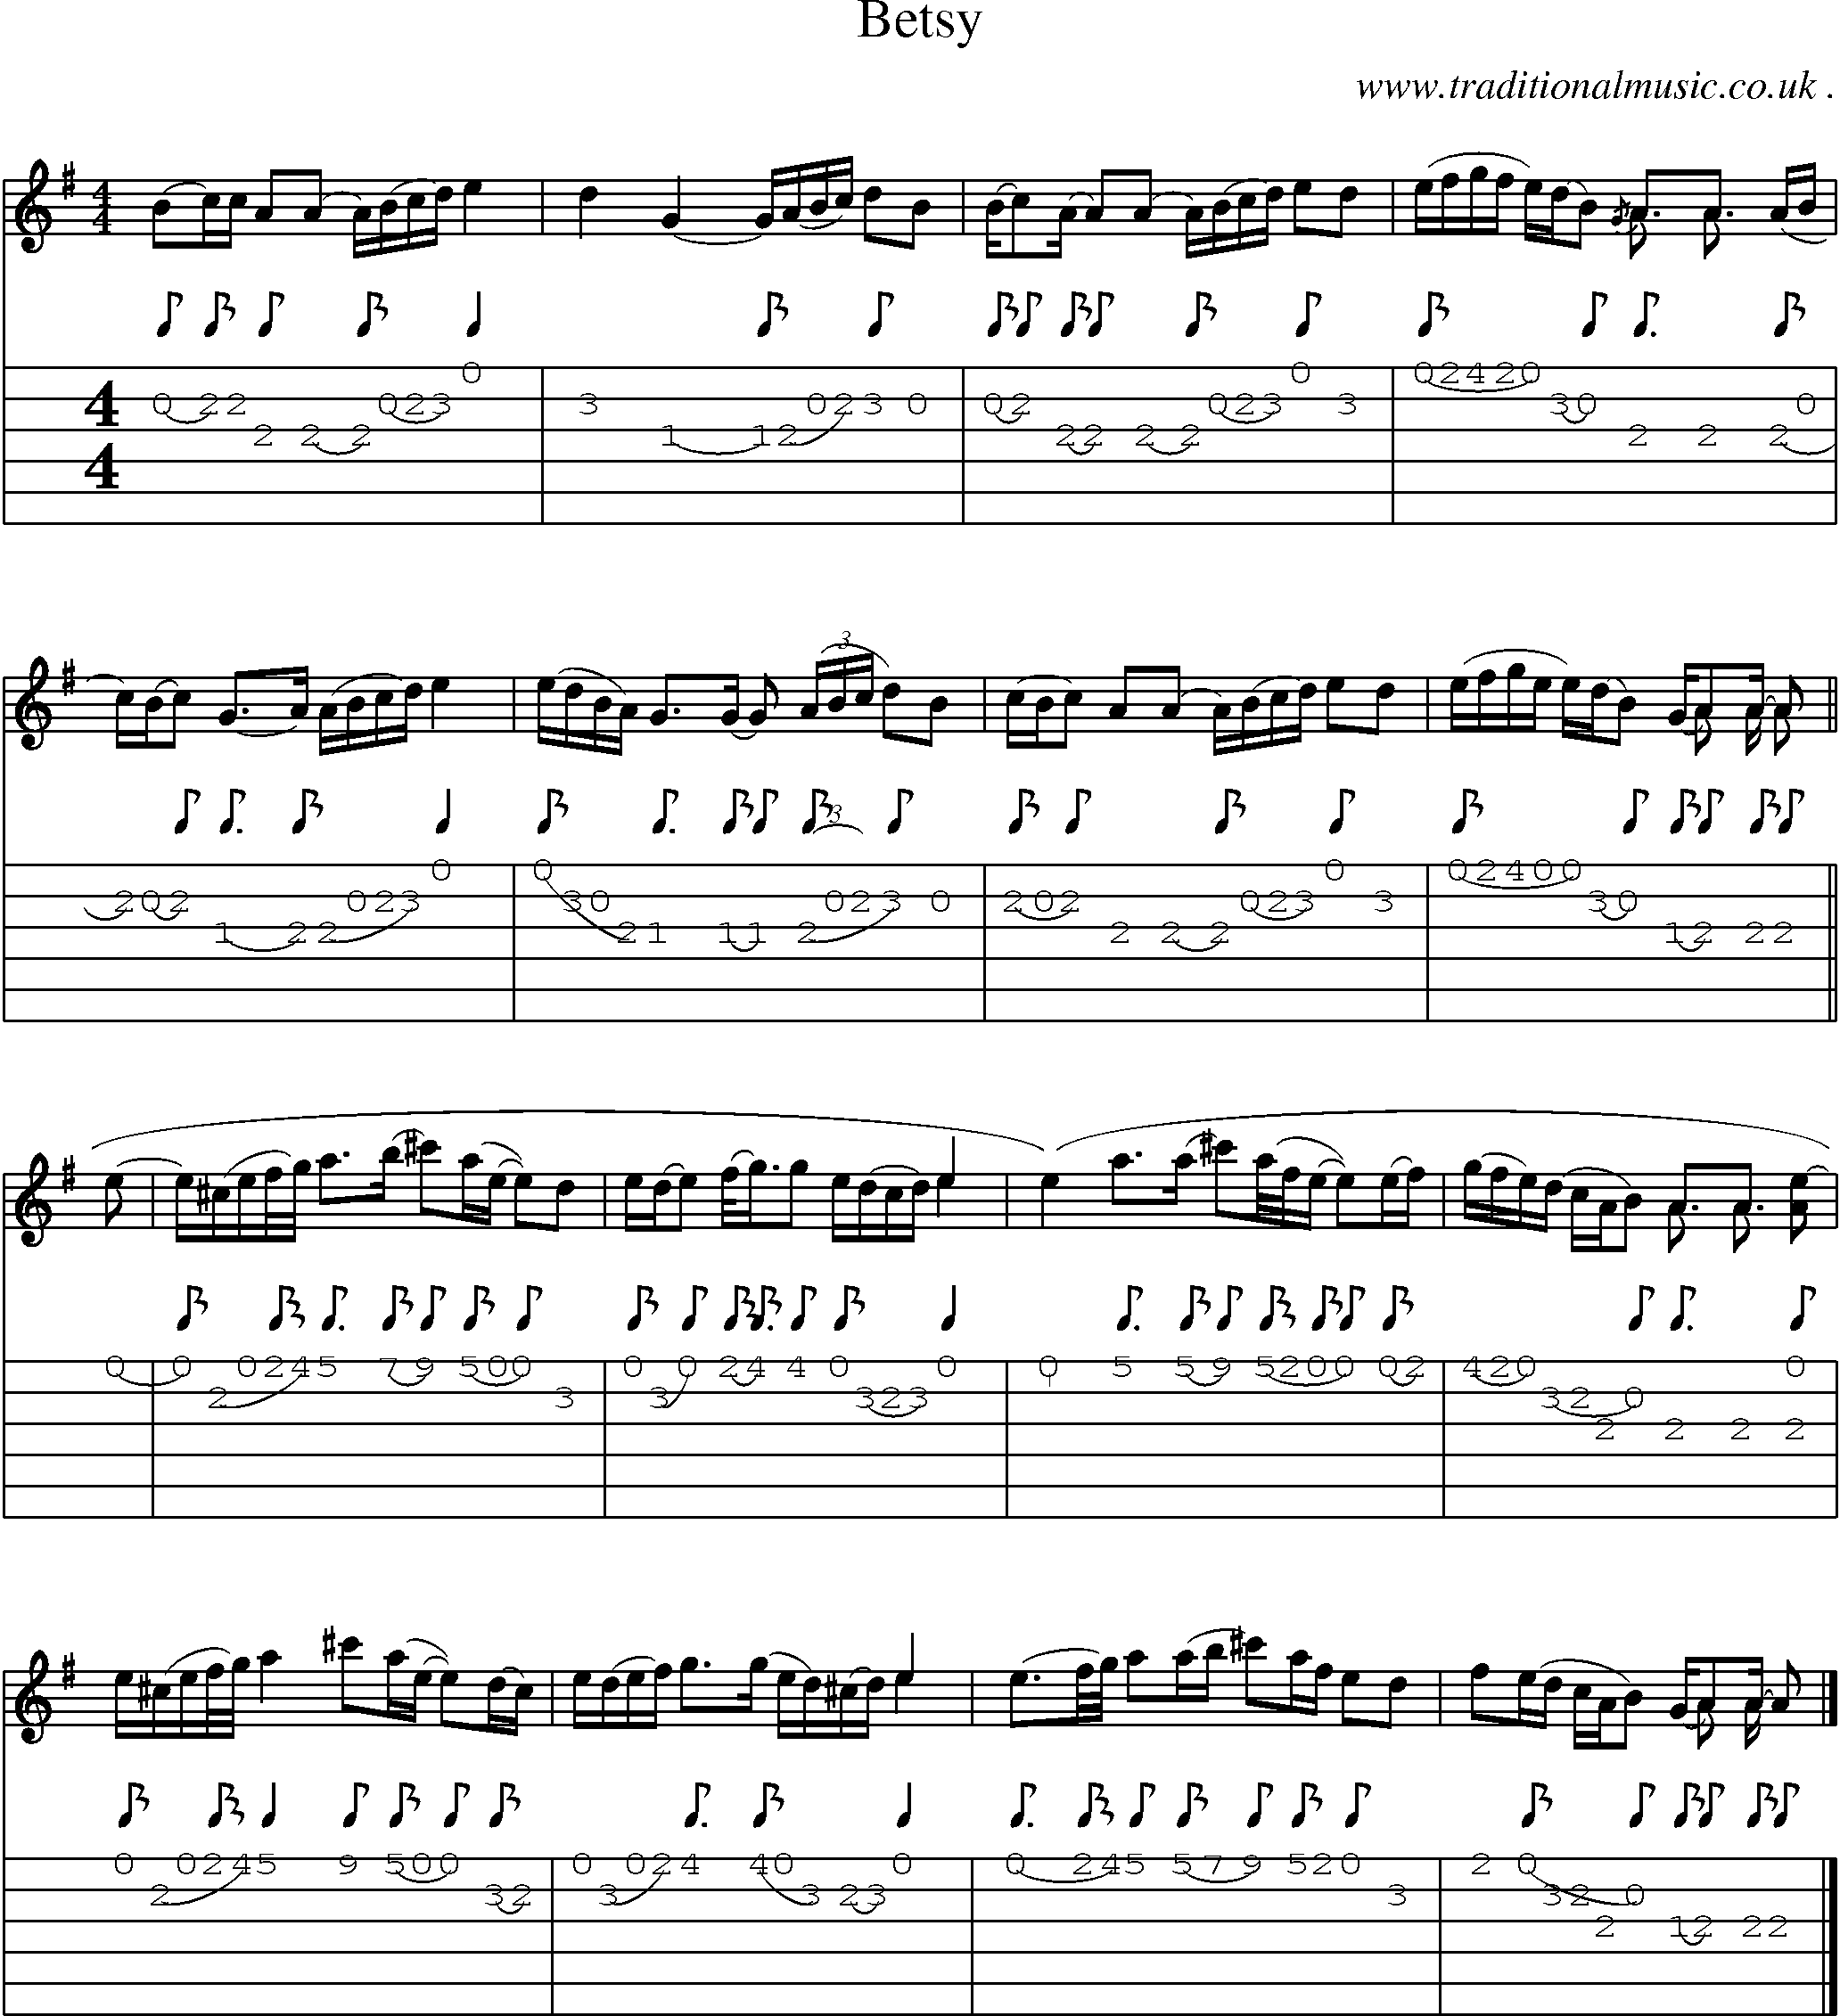 Sheet-music  score, Chords and Guitar Tabs for Betsy